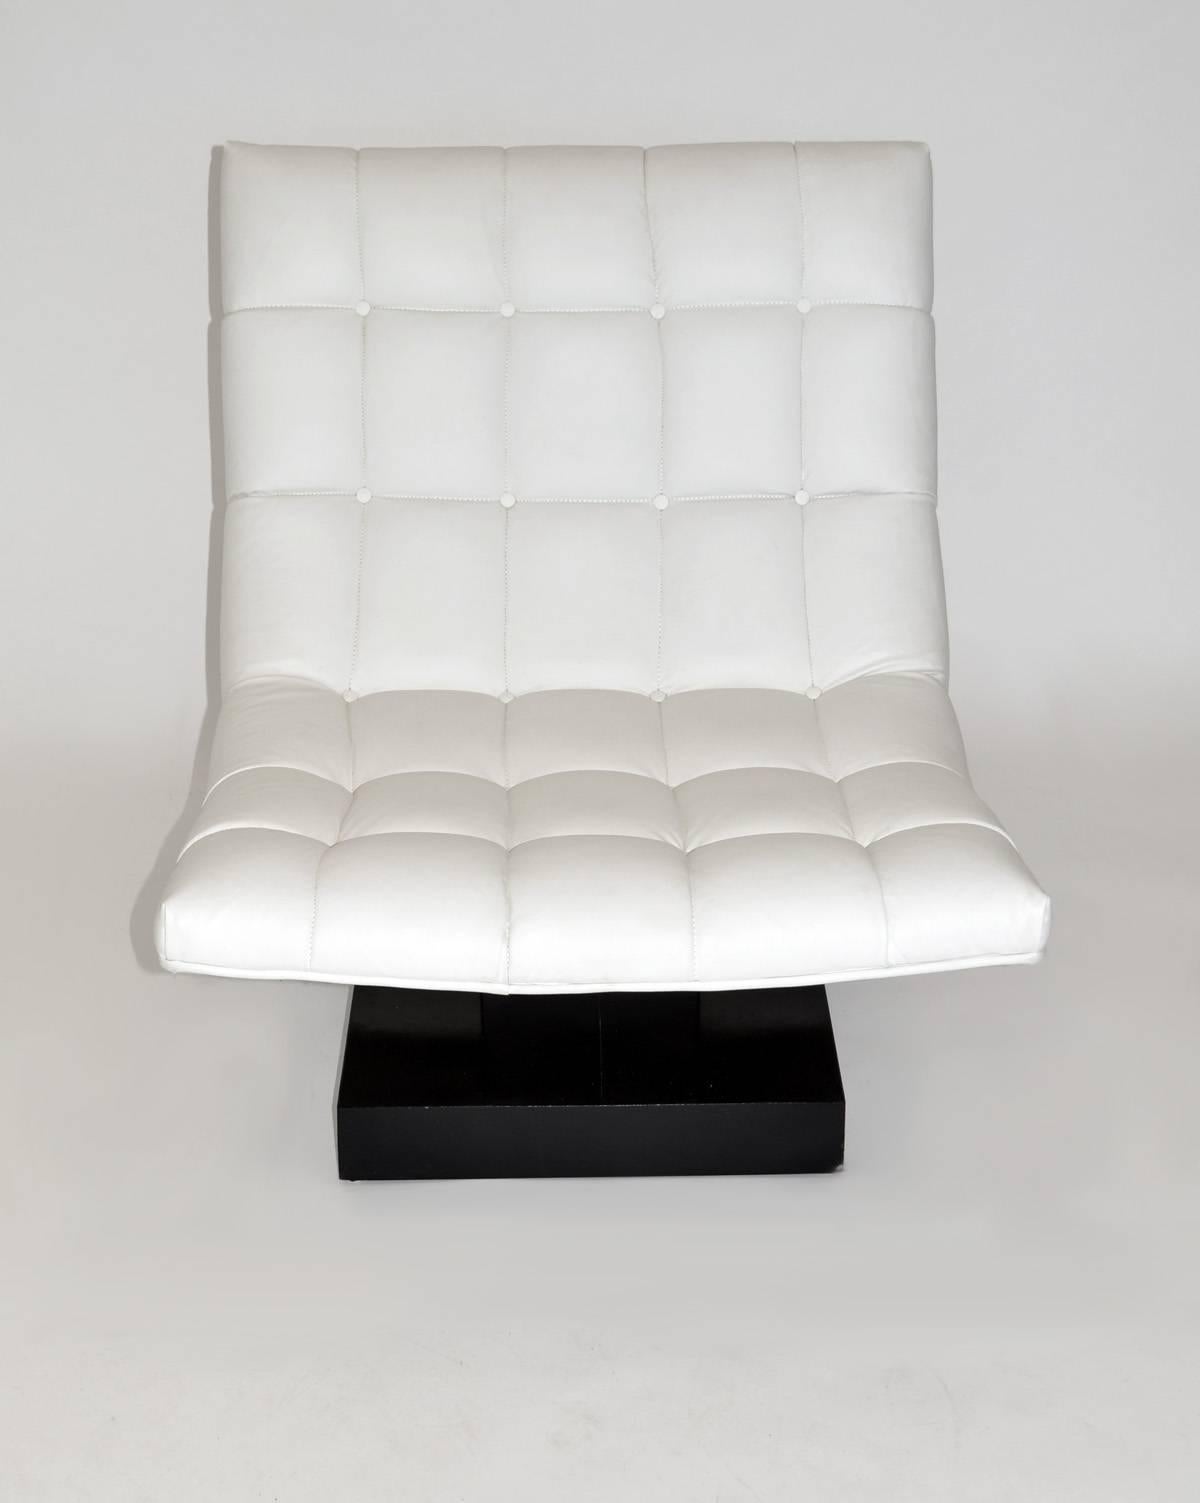 Pair of Milo Baughman leather 'Scoop' lounge chairs for Thayer Coggin minimalist white on black. Tufted true white leather upholstery over laminated, floating wood base. Labeled, 1980s.
 